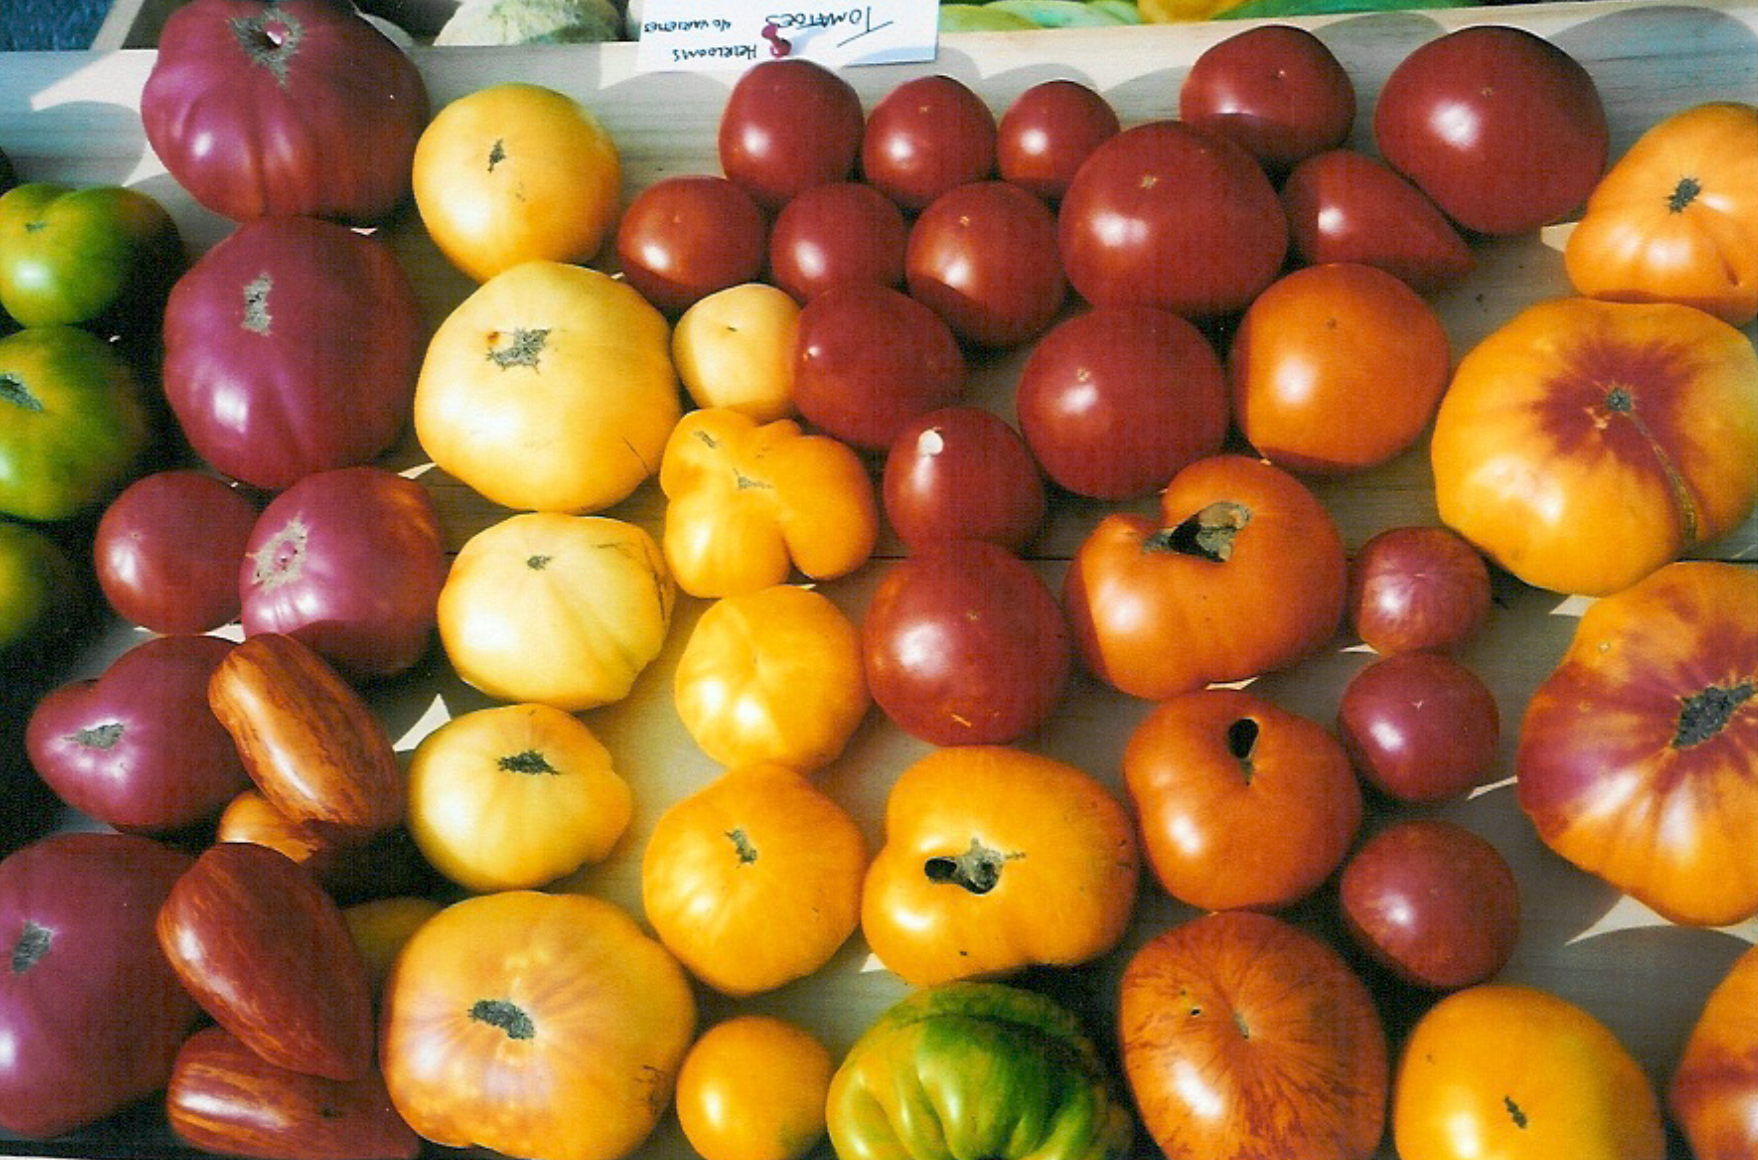 tomatoes.png